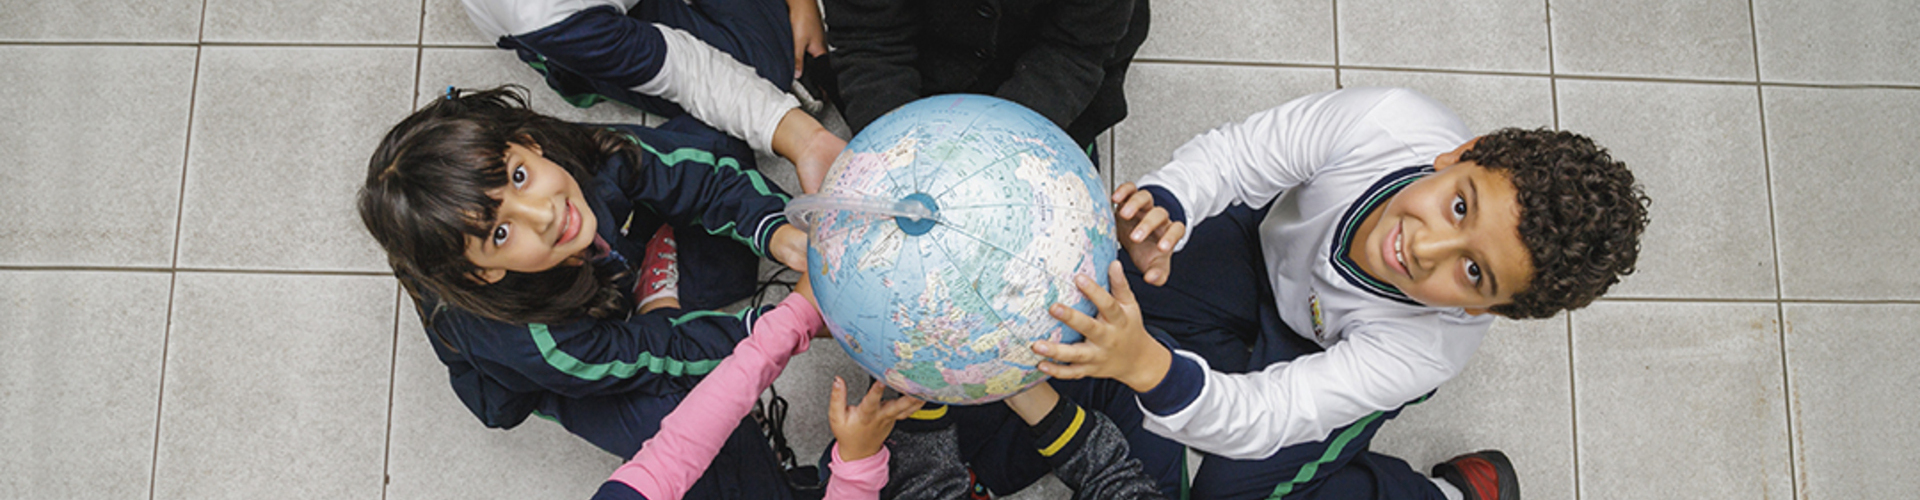 Description: In support of the Ayrton Senna Institute partnership, a group of children holding a globe encourages company donations to advance education and empower underprivileged youth.